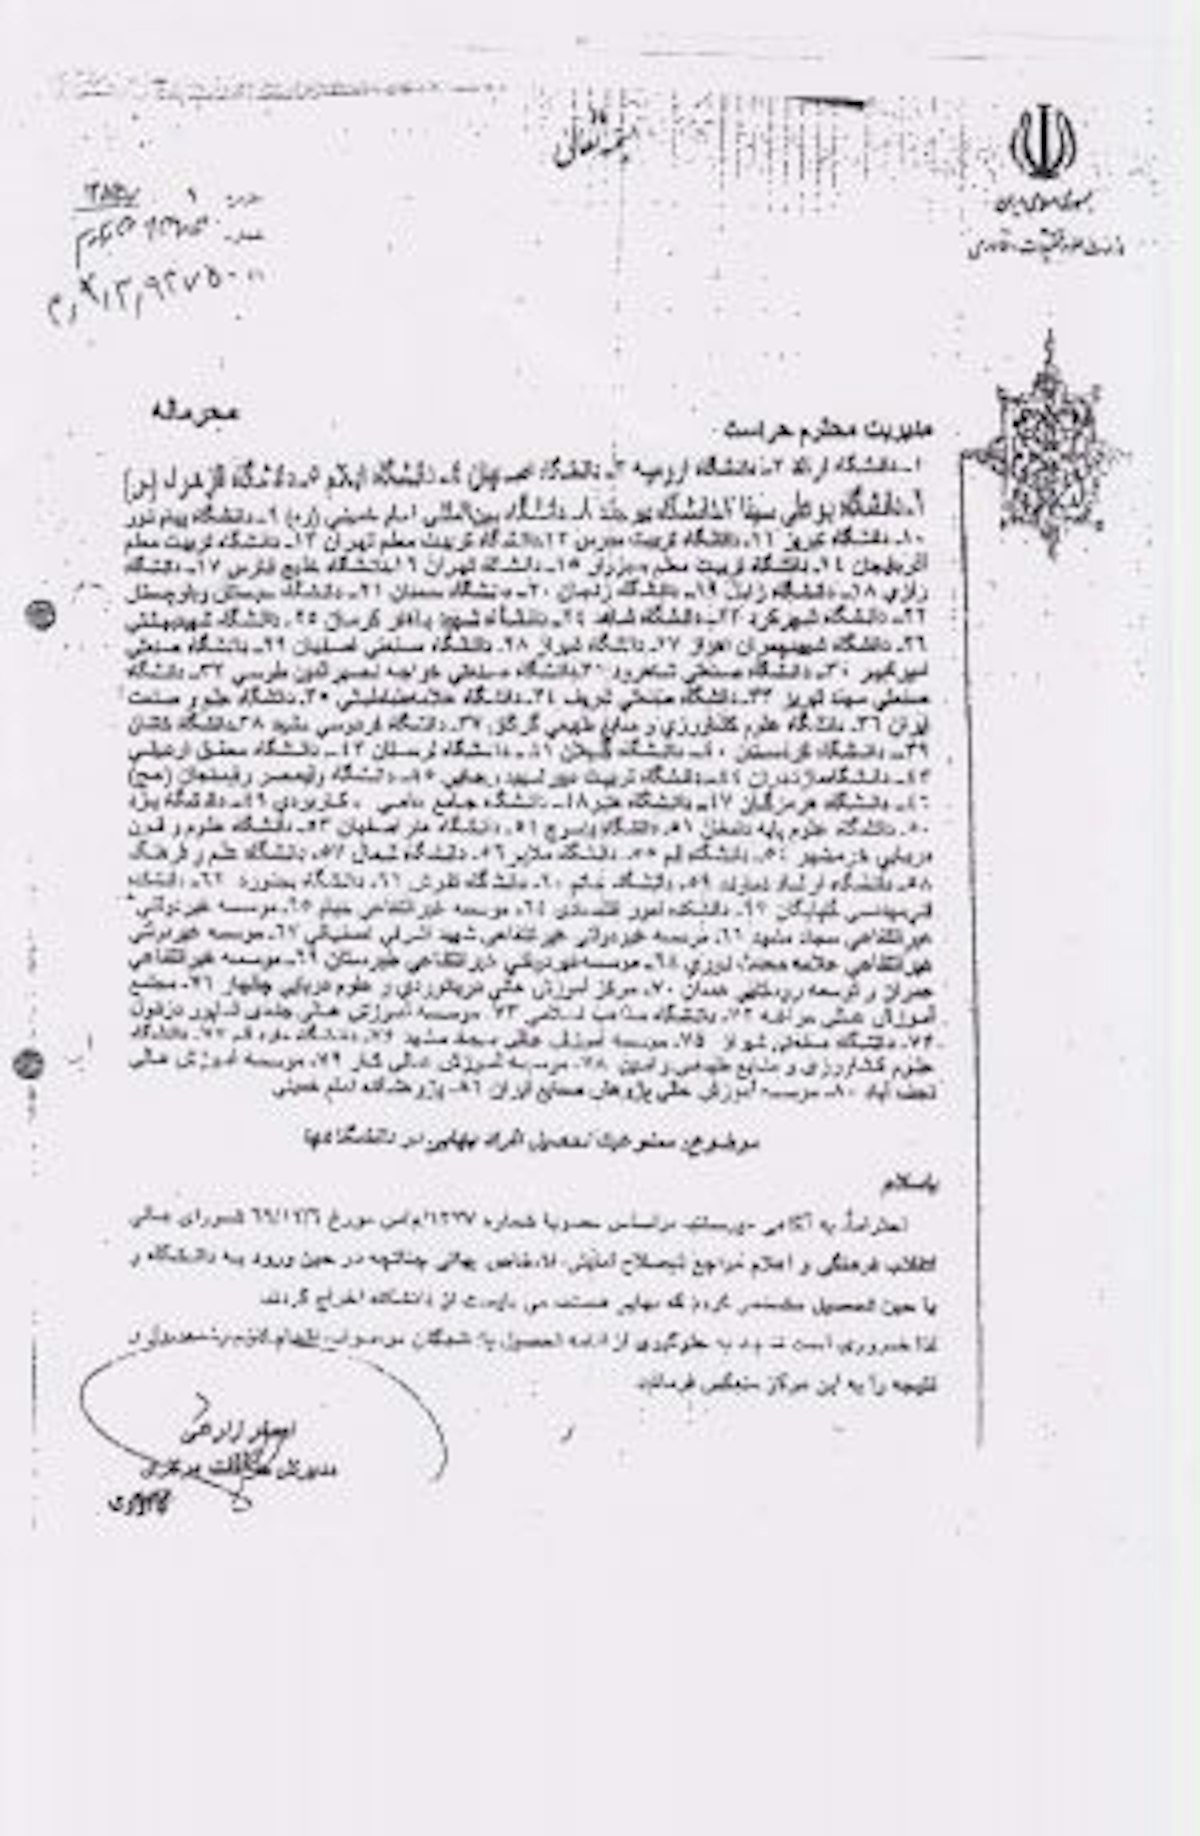 A 2006 confidential communication from the director general of the Central Security Office of Iran's Ministry of Science, Research and Technology – which oversees all state-run universities – instructed 81 universities to expel any Baha'i students. "[I]f the identity of Baha'i individuals becomes known at the time of enrolment or during the course of their studies, they must be expelled from university," stated the letter.